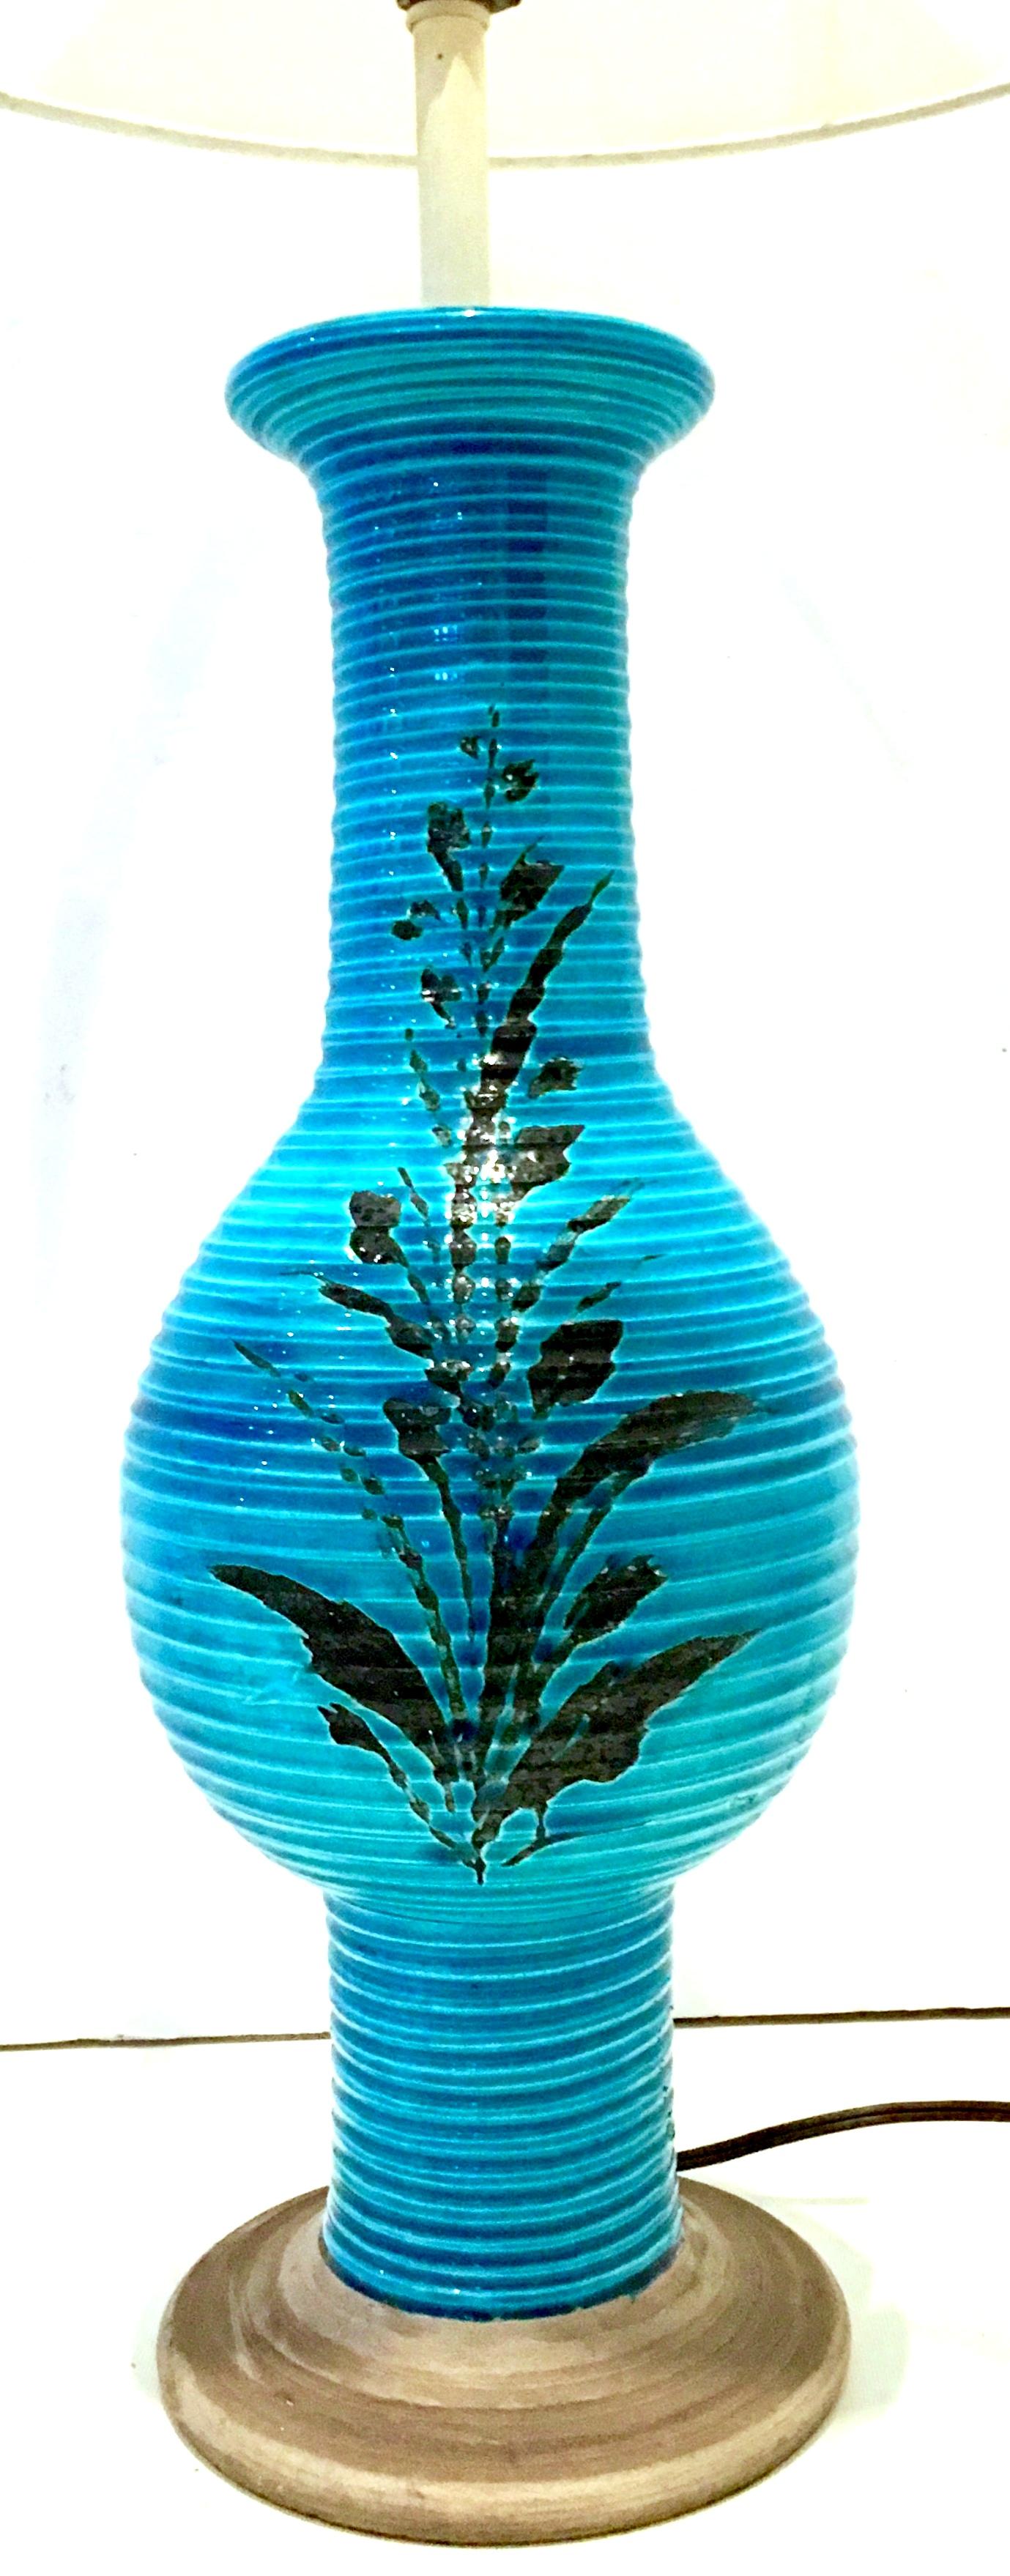 Mid-Century Modern 1960s Italian Cerulean Blue and Black Ceramic Glaze Pottery Lamp by, Bitossi For Sale